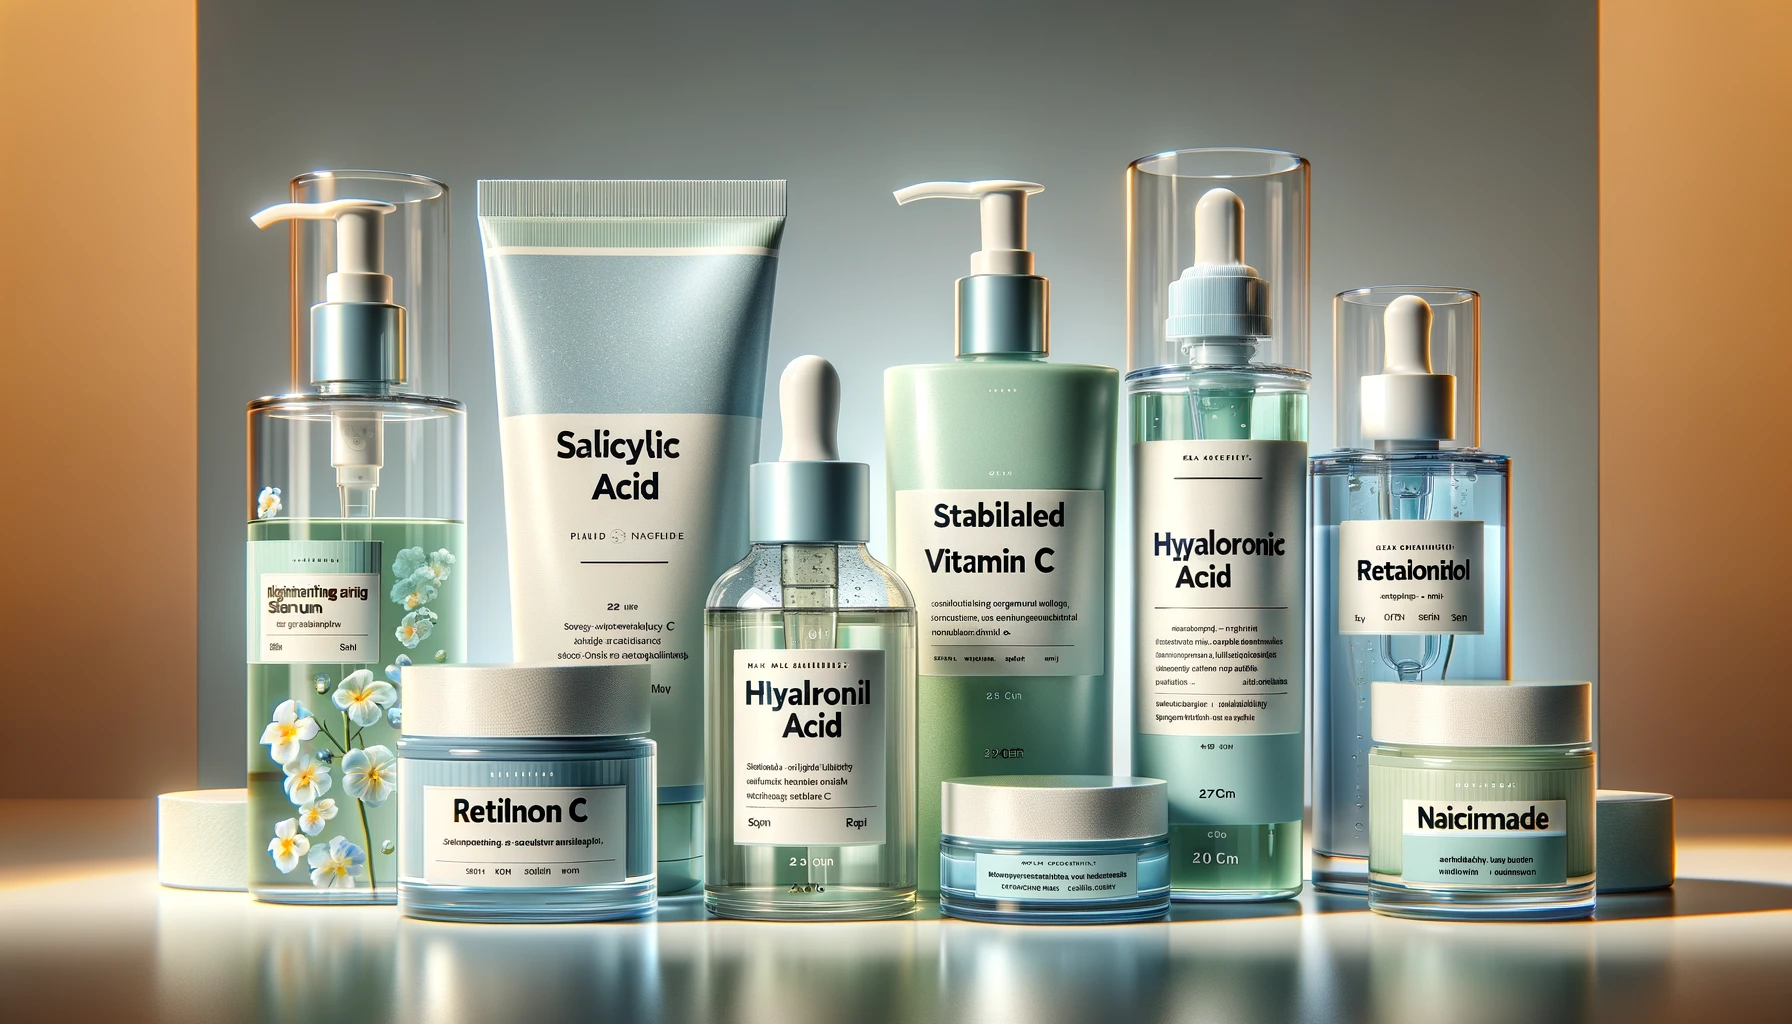 Collage of five key skincare products: exfoliating cleanser with salicylic acid, brightening serum with stabilized vitamin C, hydrating moisturizer with hyaluronic acid, anti-aging cream with retinol, and balancing toner with niacinamide, arranged against a spa-like background in soft blues and greens.